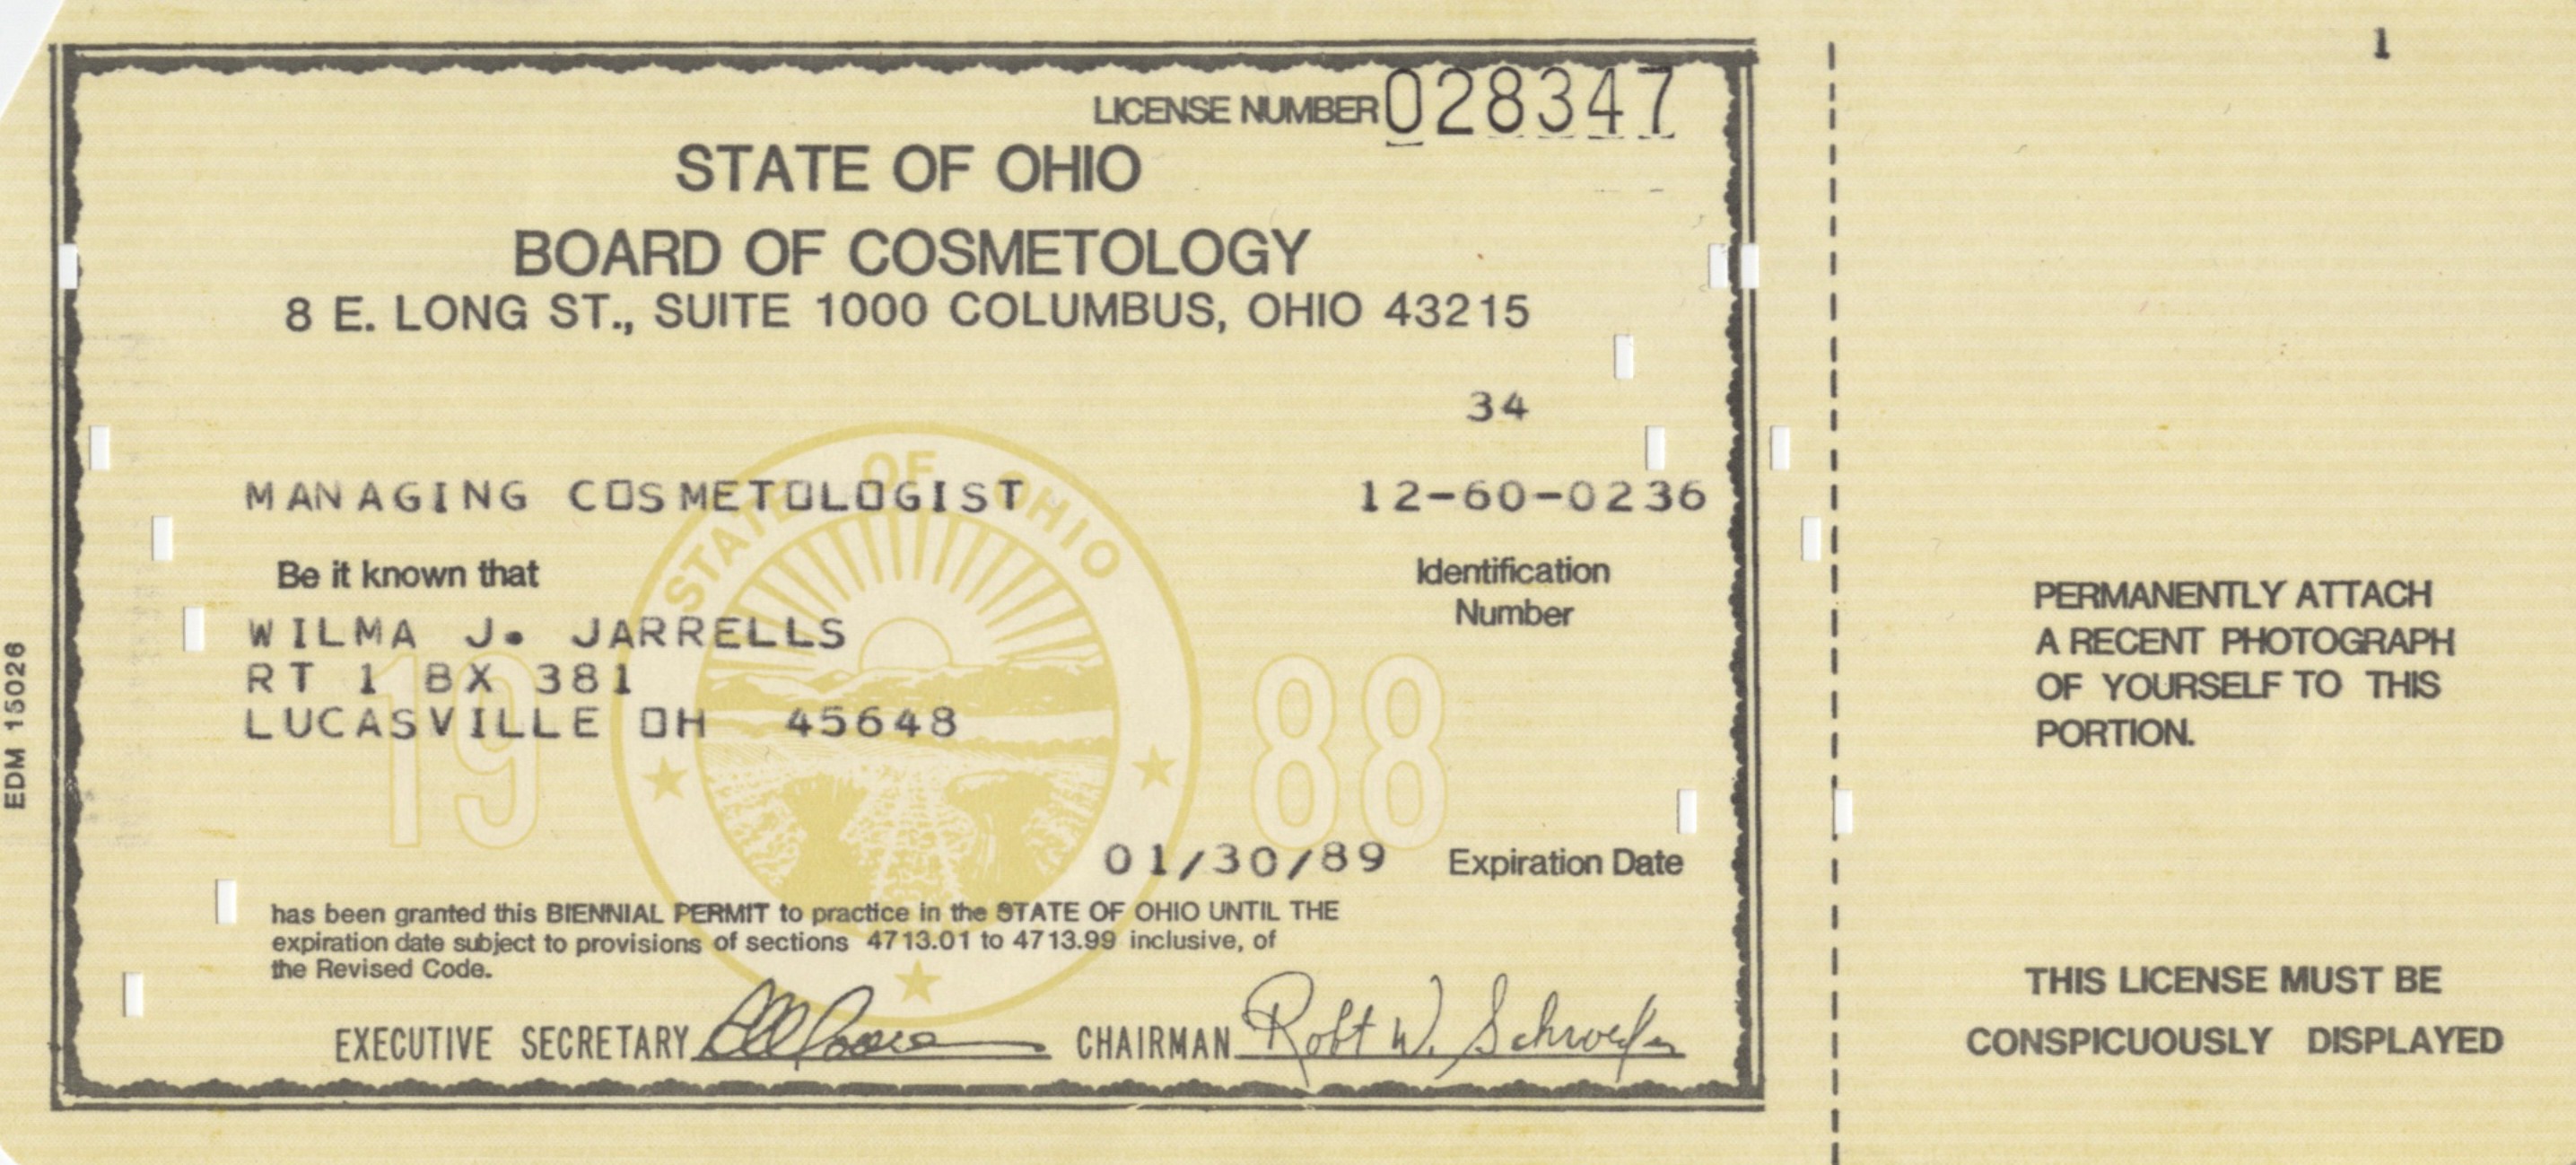 board of cosmetology license verification